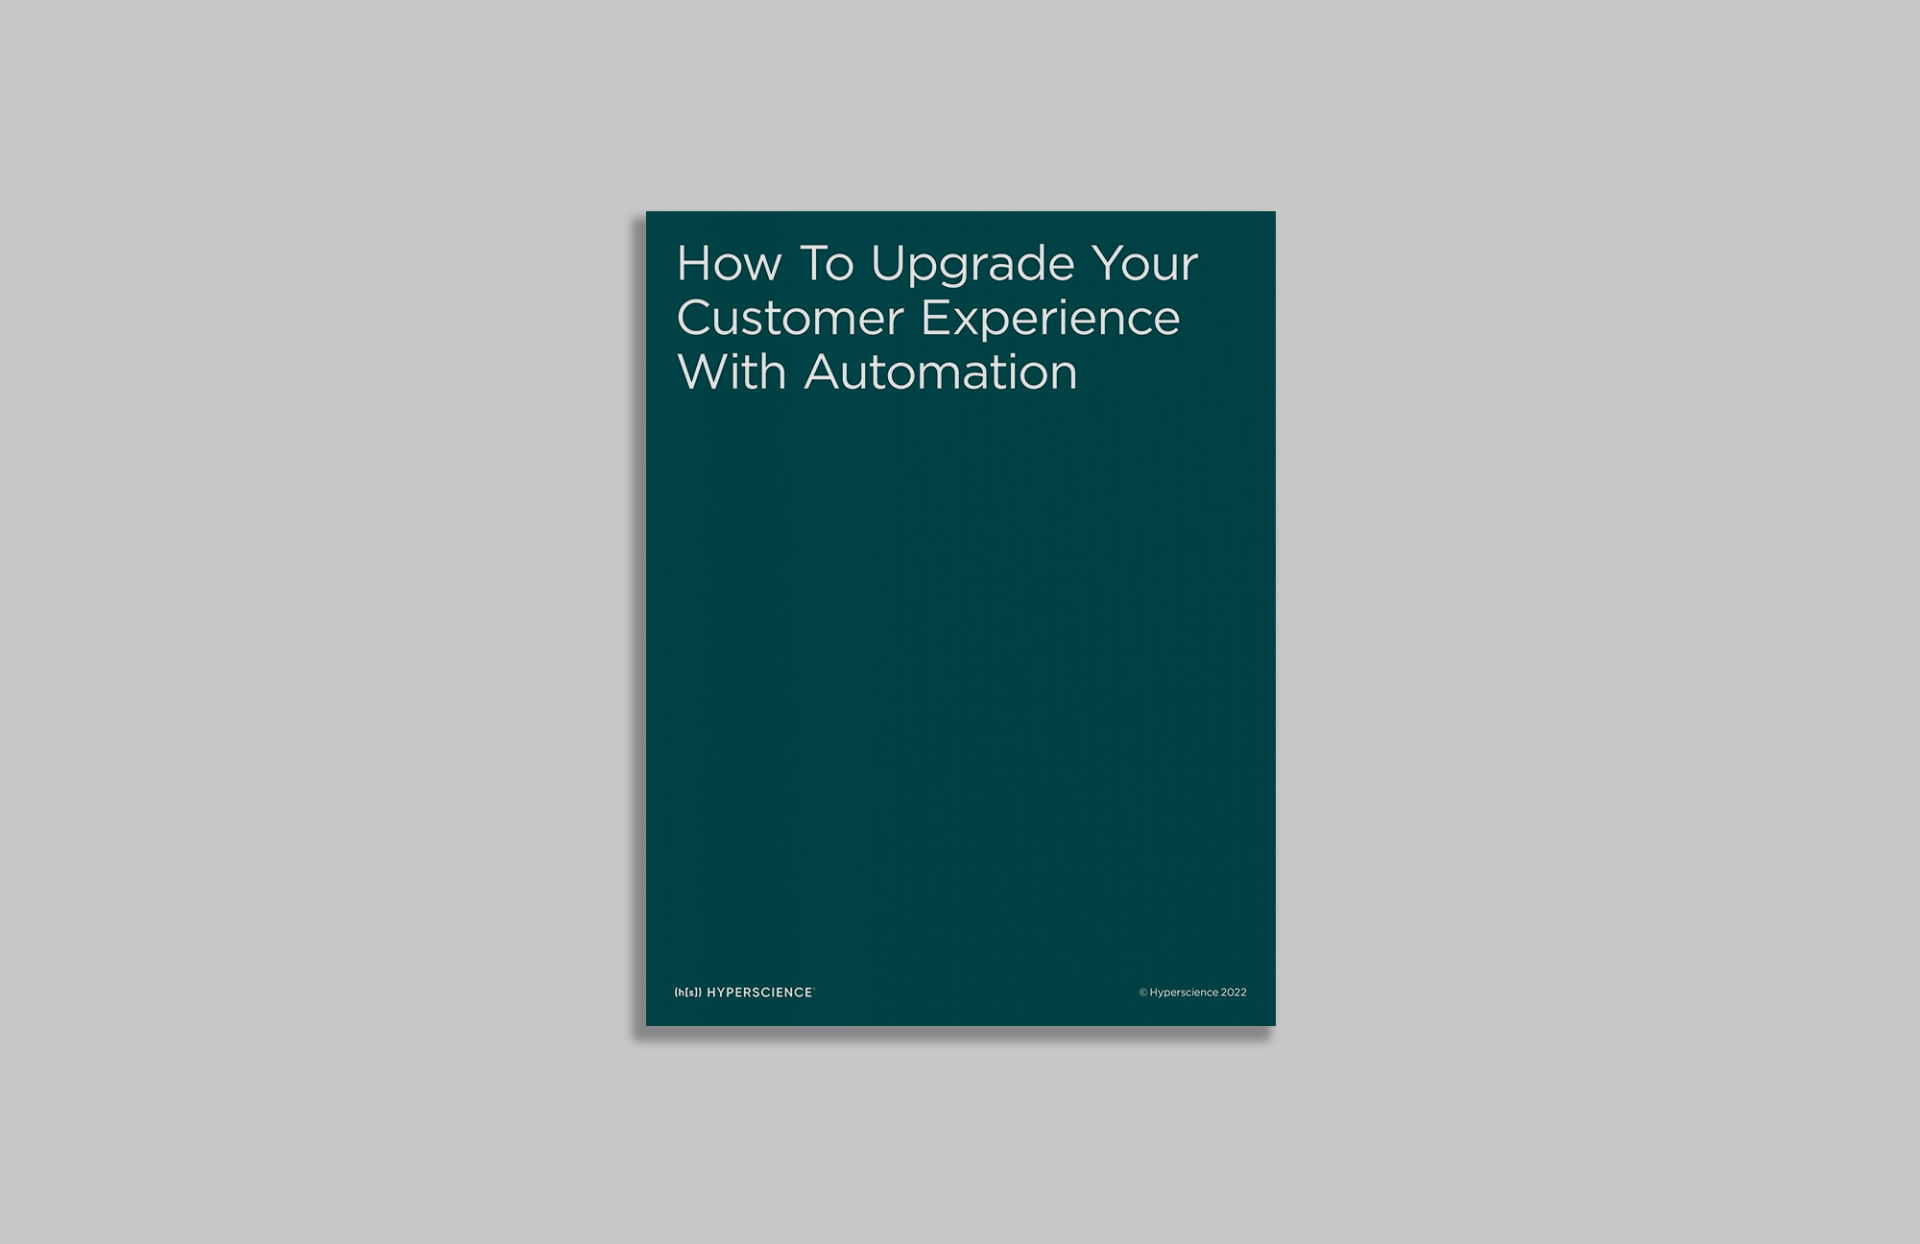 How to Upgrade Your Customer Experience with Automation